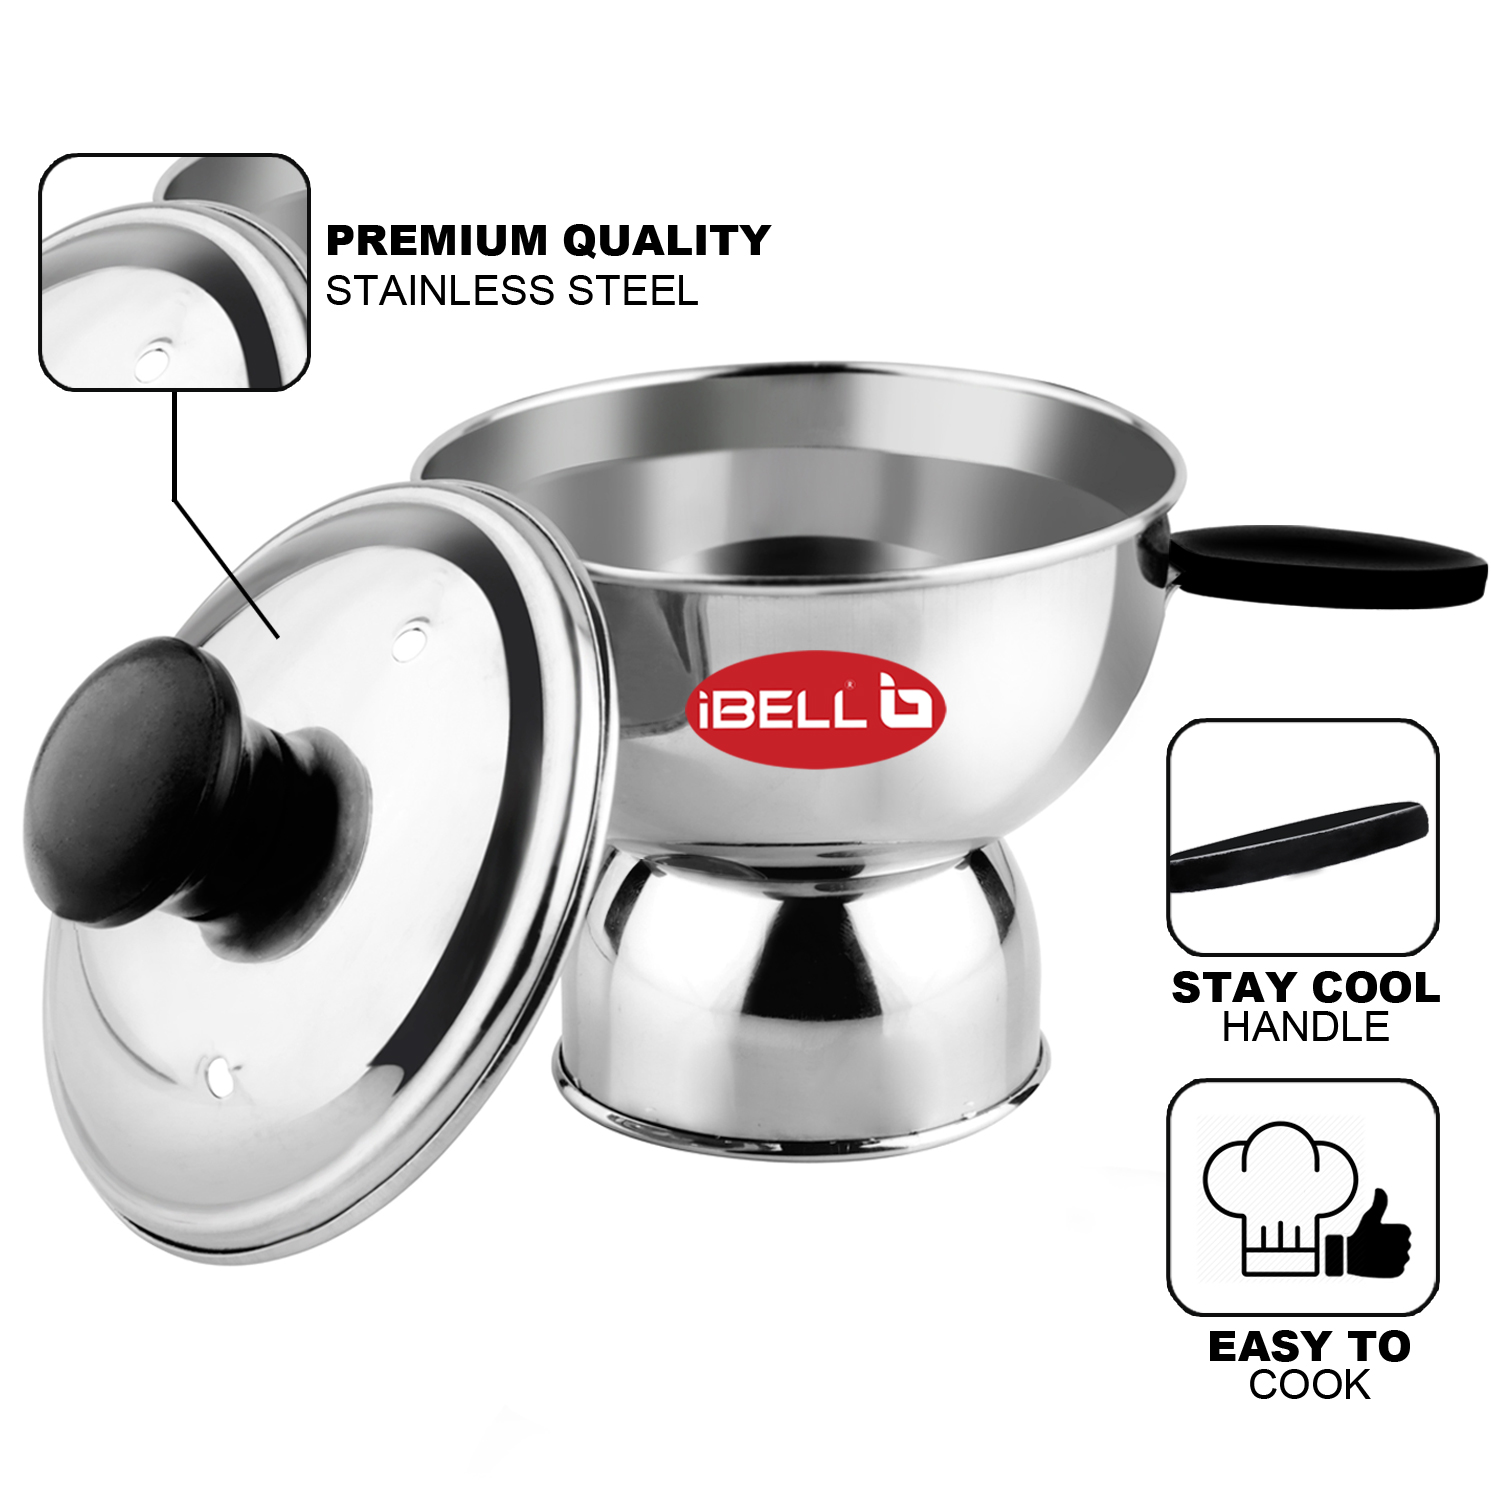 Use with Pressure Cooker Stainless Steel Chiratta Puttu Maker 